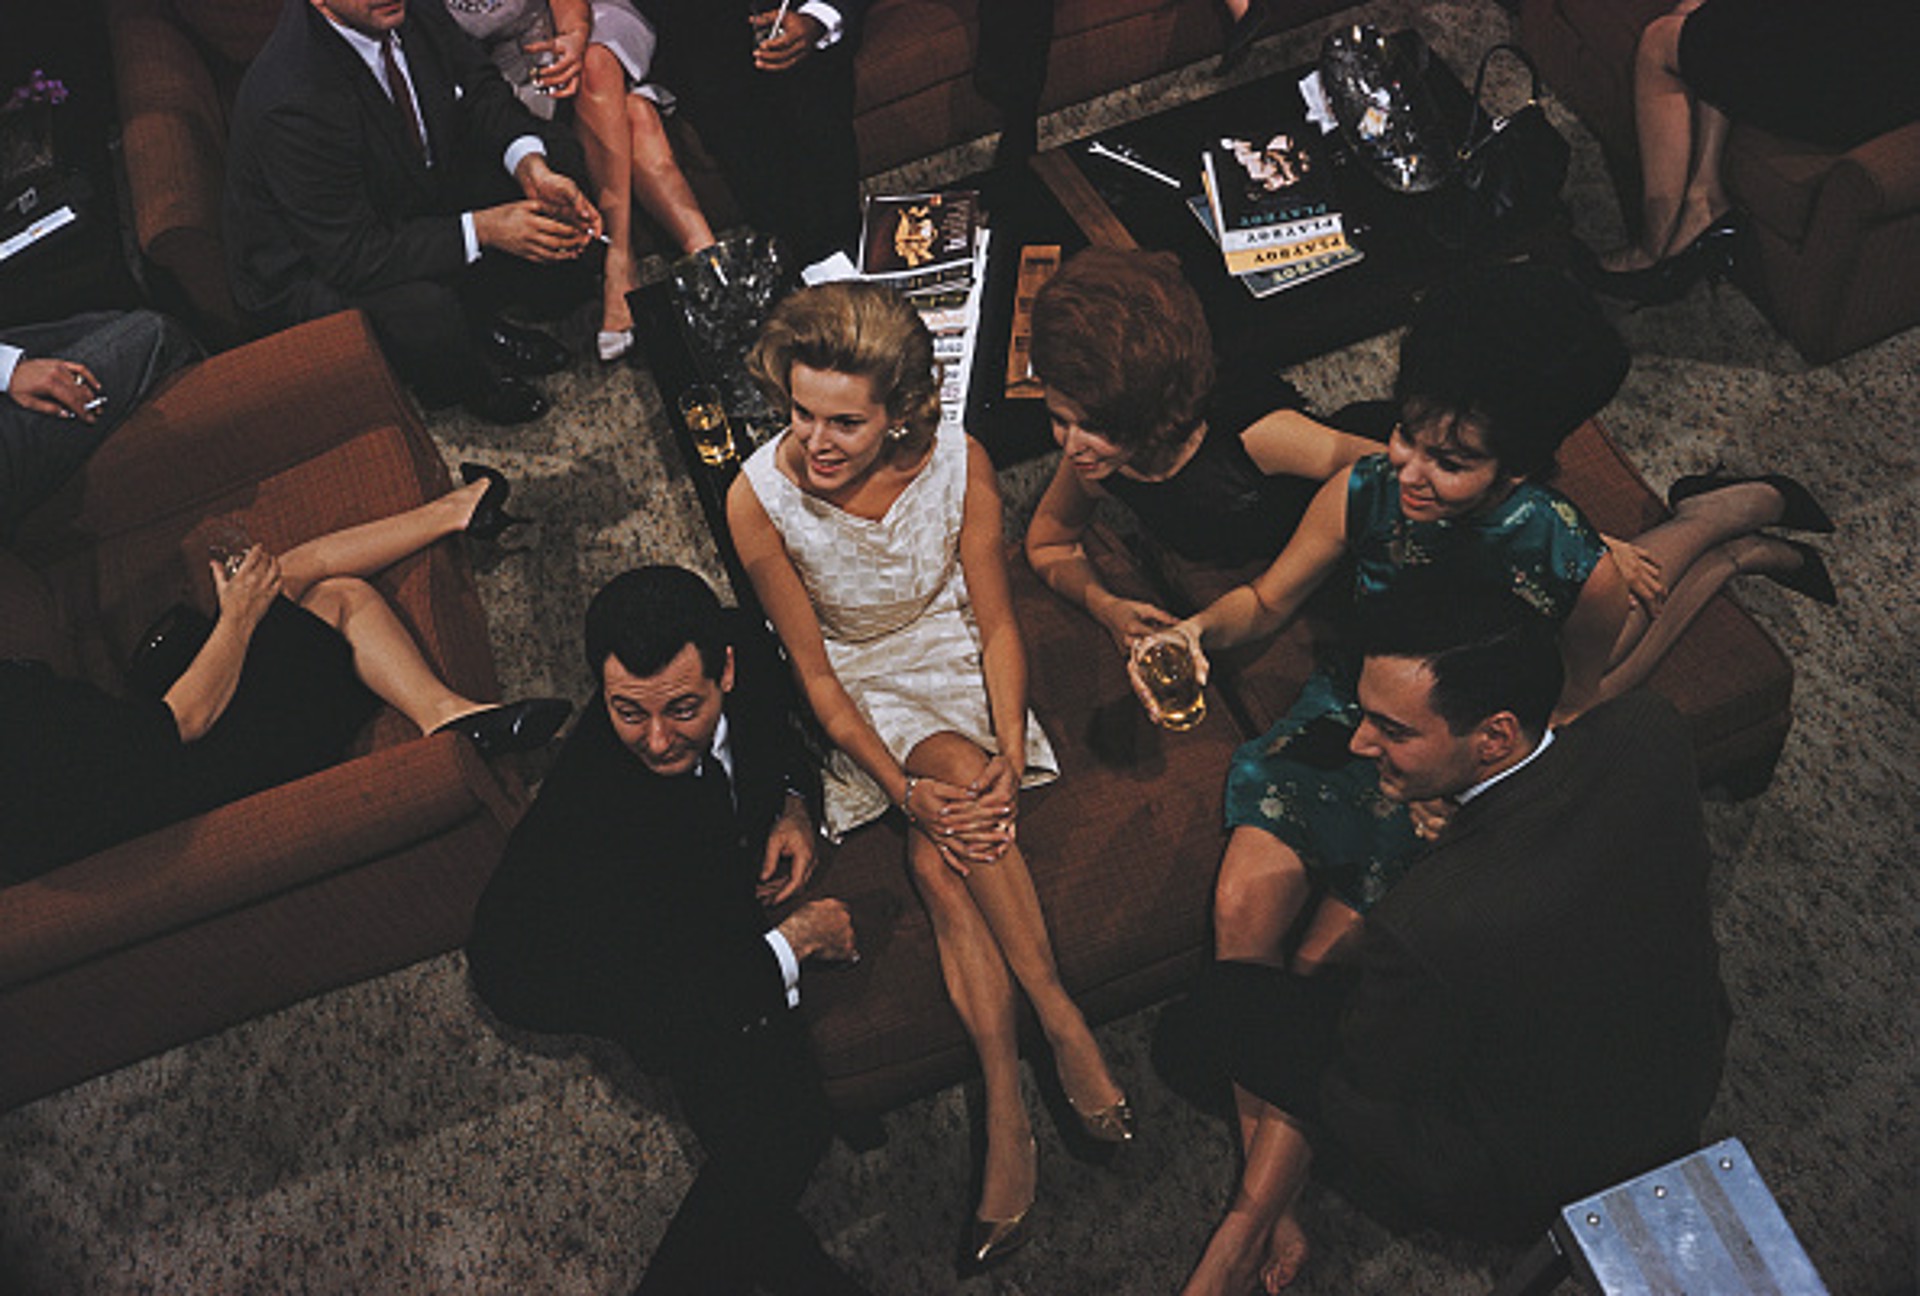 Party At The Playboy Mansion by Slim Aarons